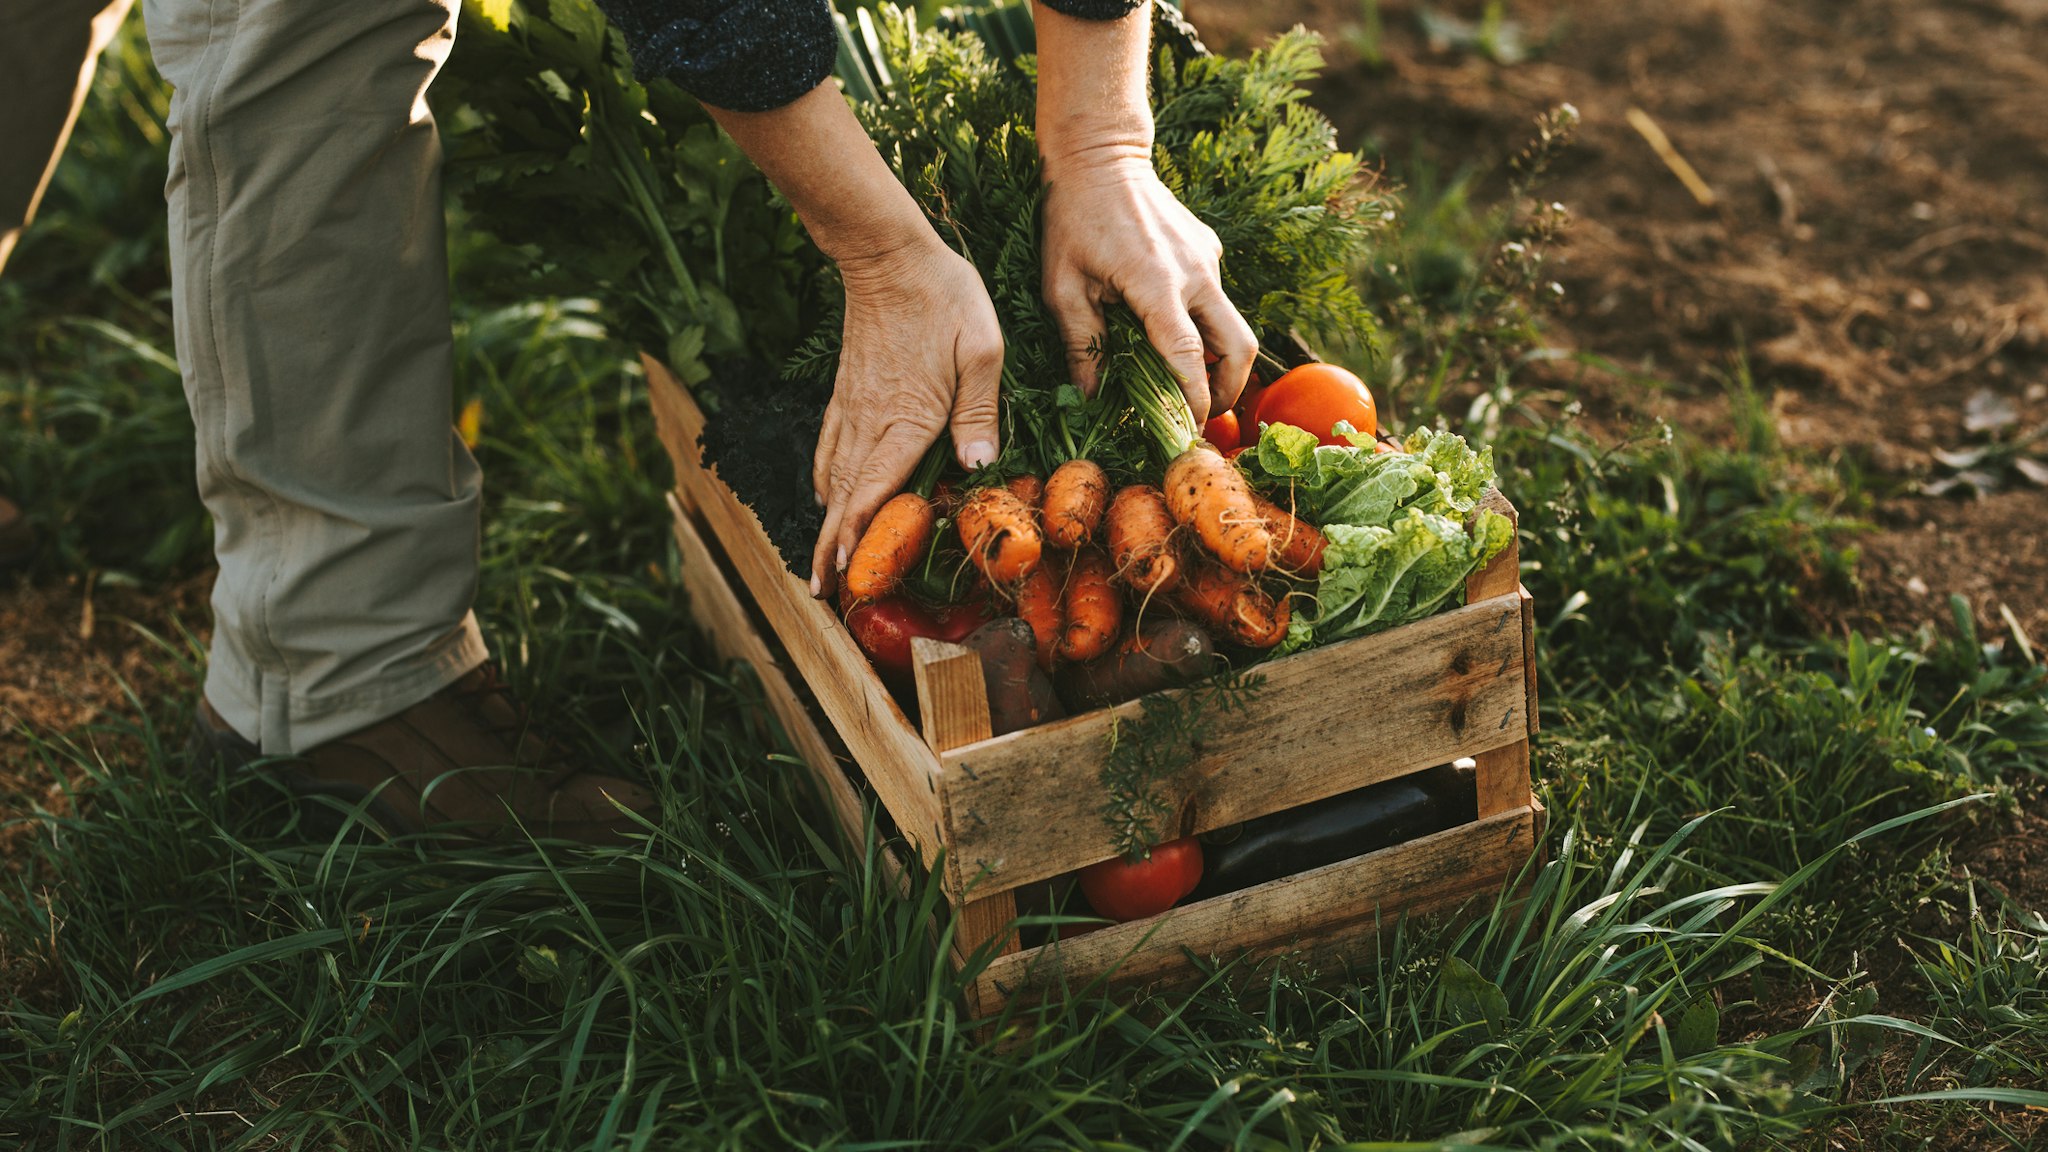 Low Angle View Of Farmer Vegetables On Field - stock photo